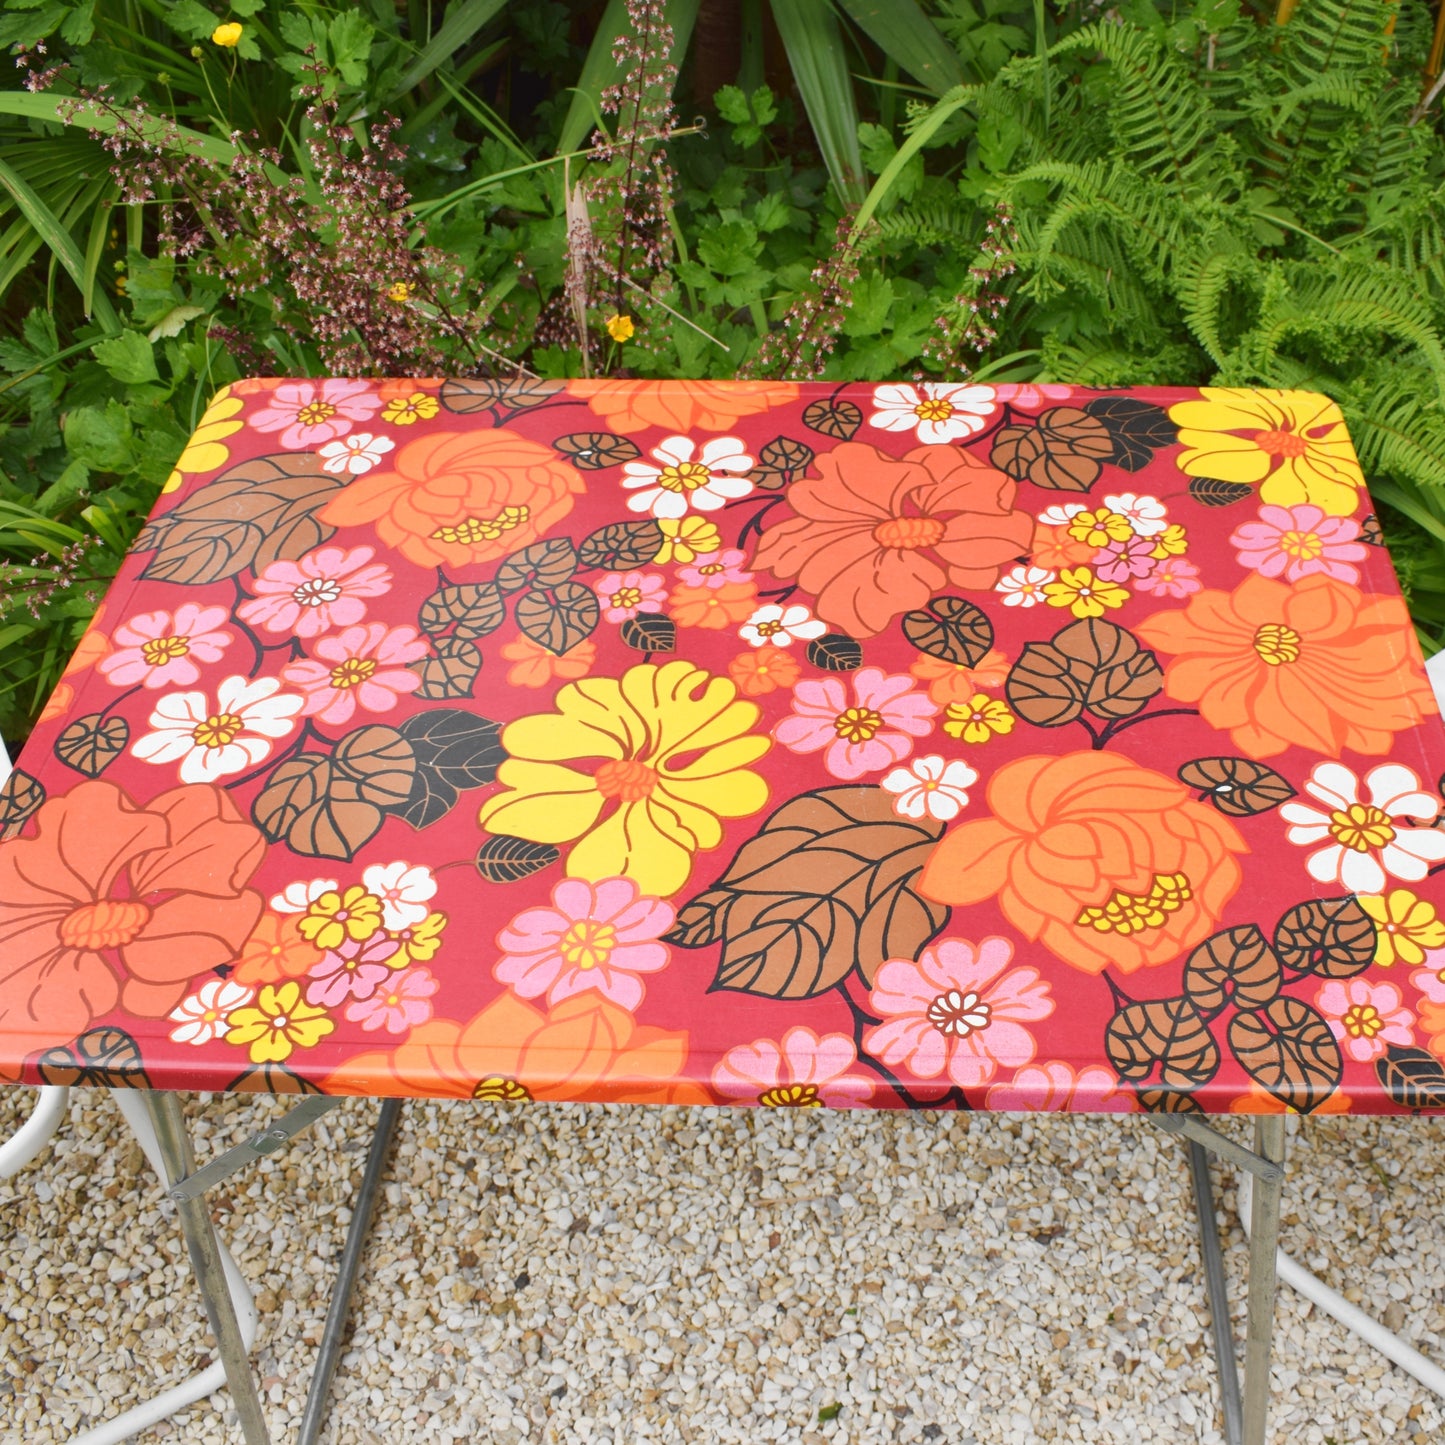 Vintage 1970s Folding Table & Chairs - Flower Power Designs